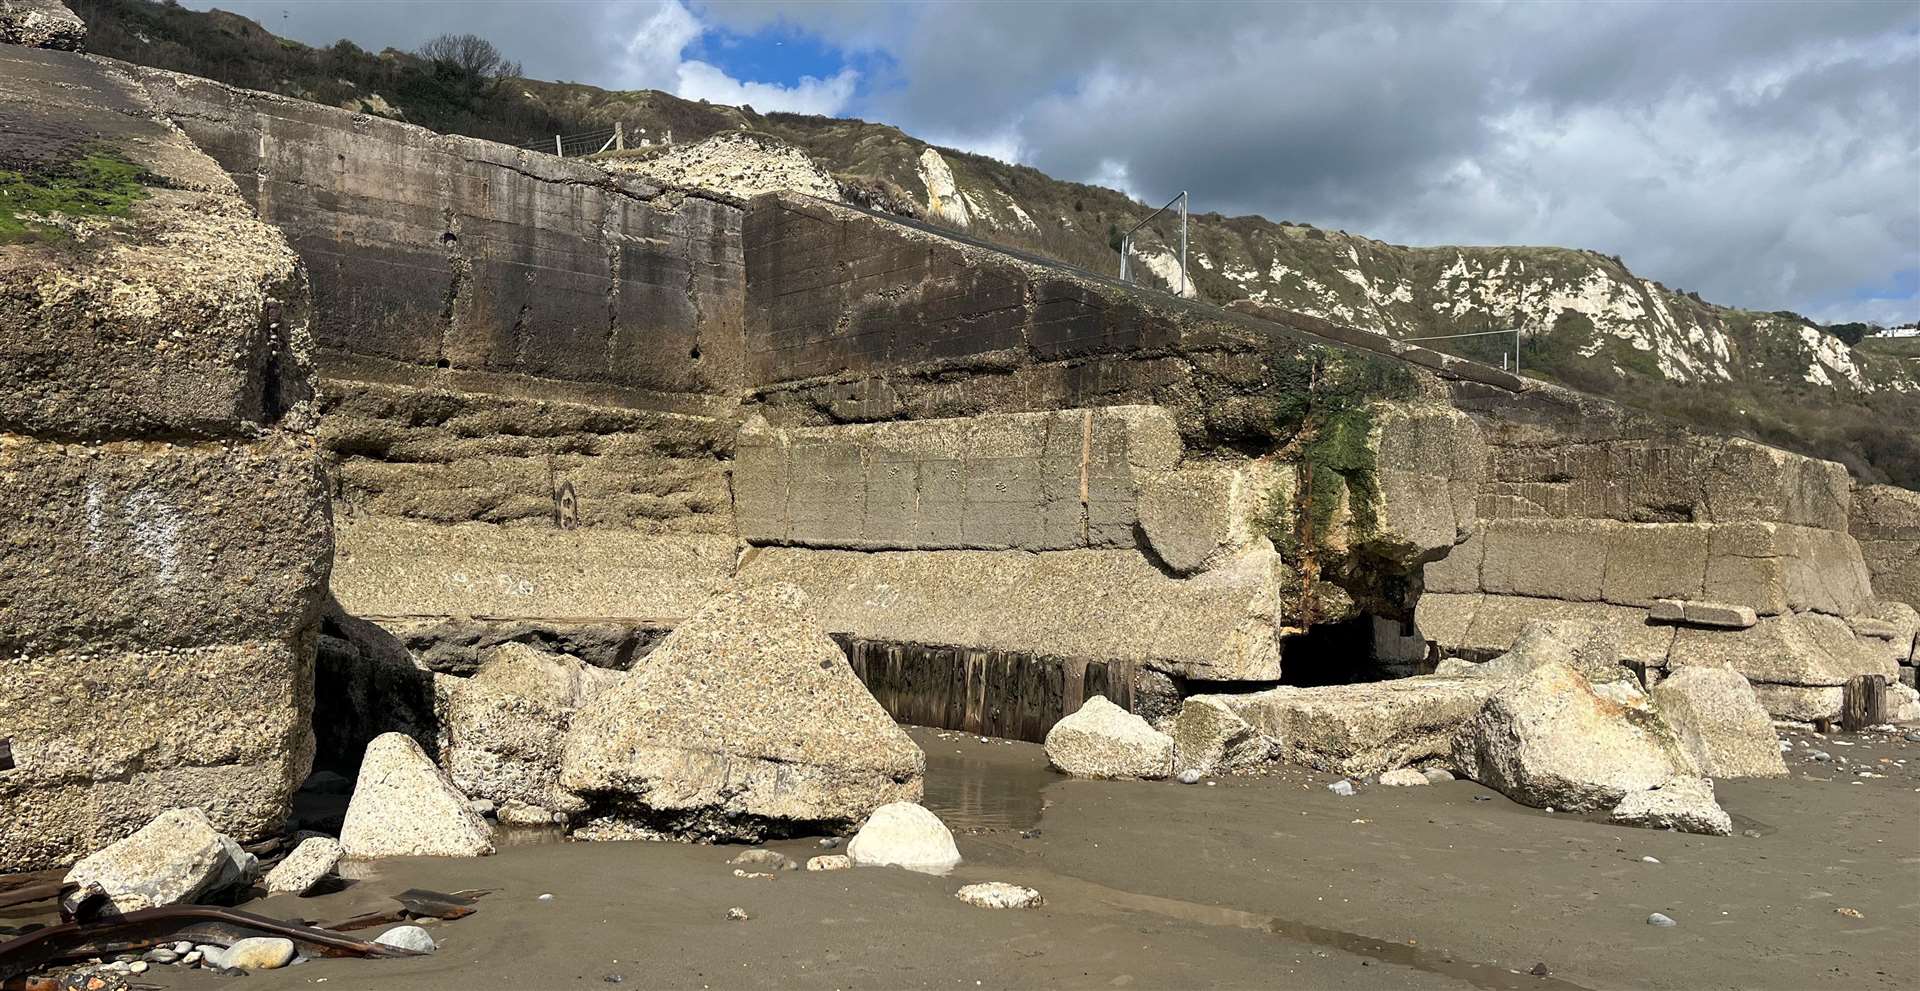 Damaged has also occurred below the now sectioned off part of Folkestone Warren